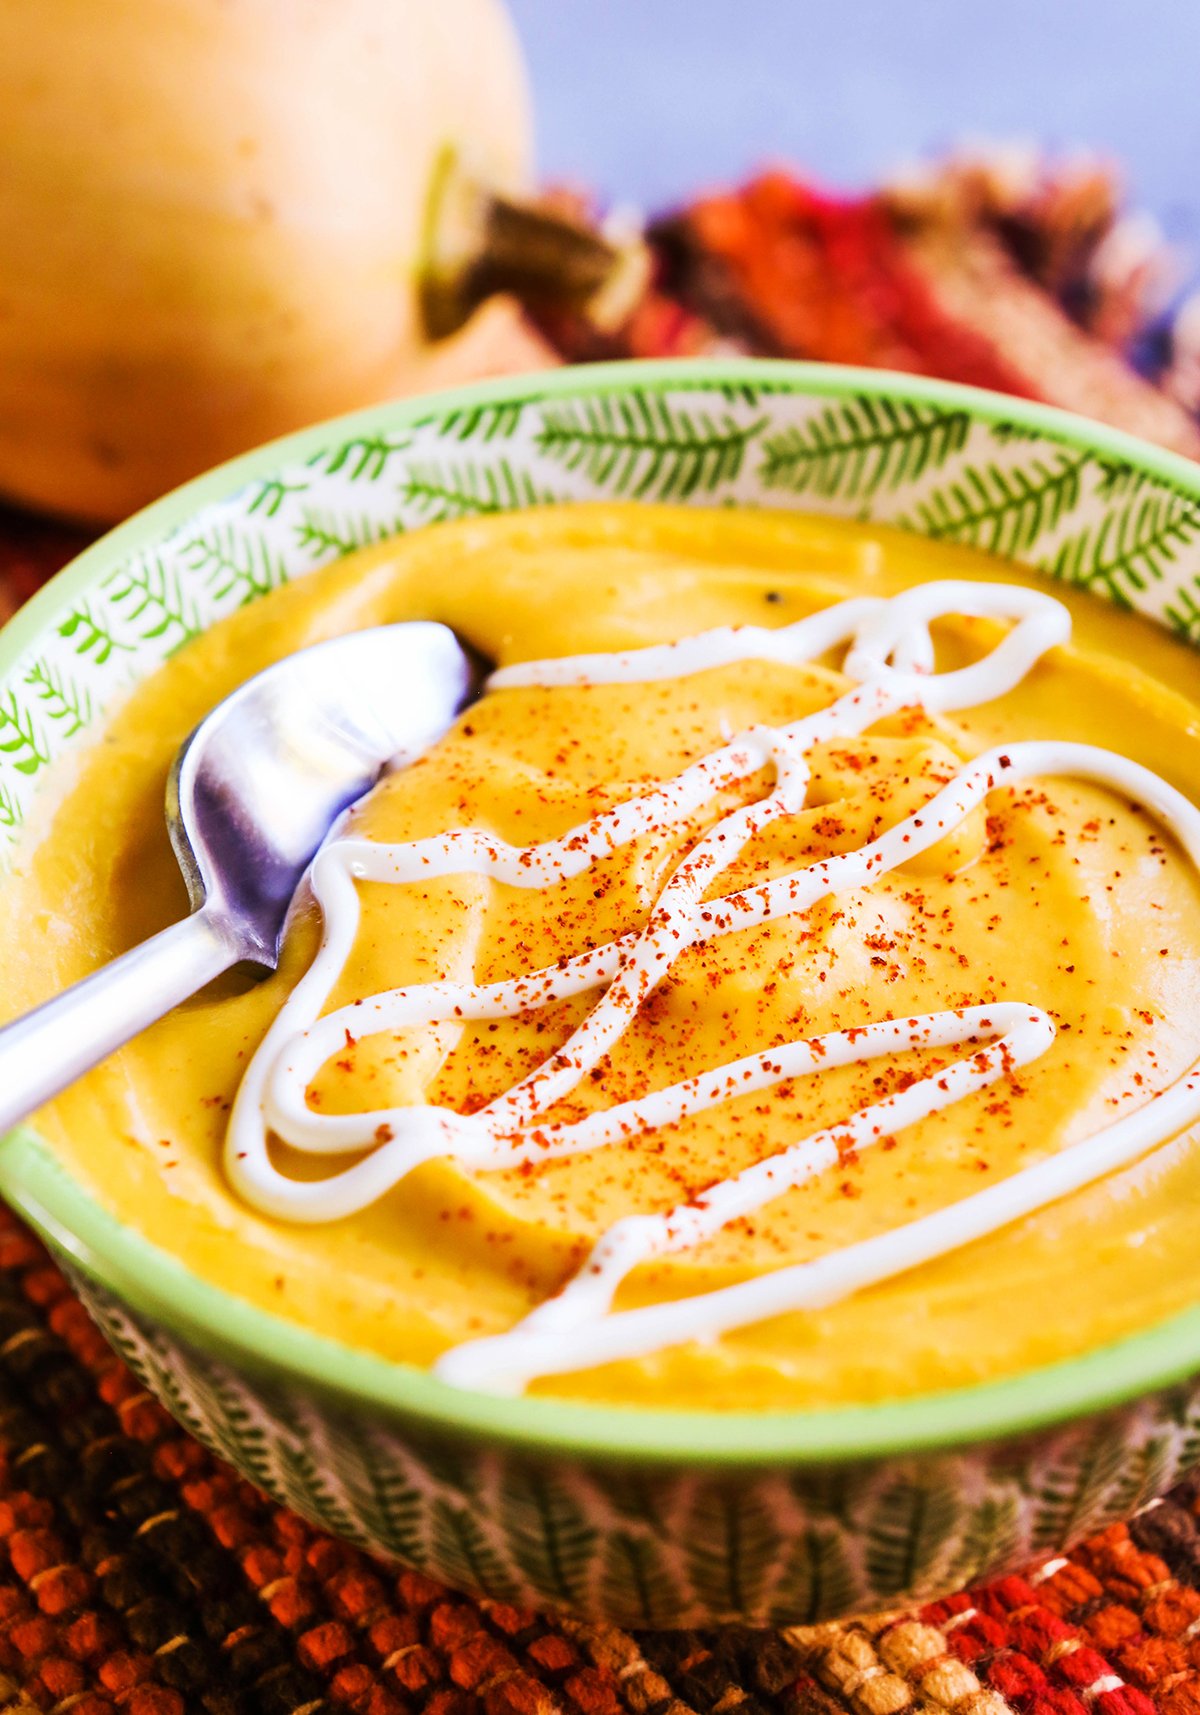 Bowl of butternut squash soup with a spoon inside.